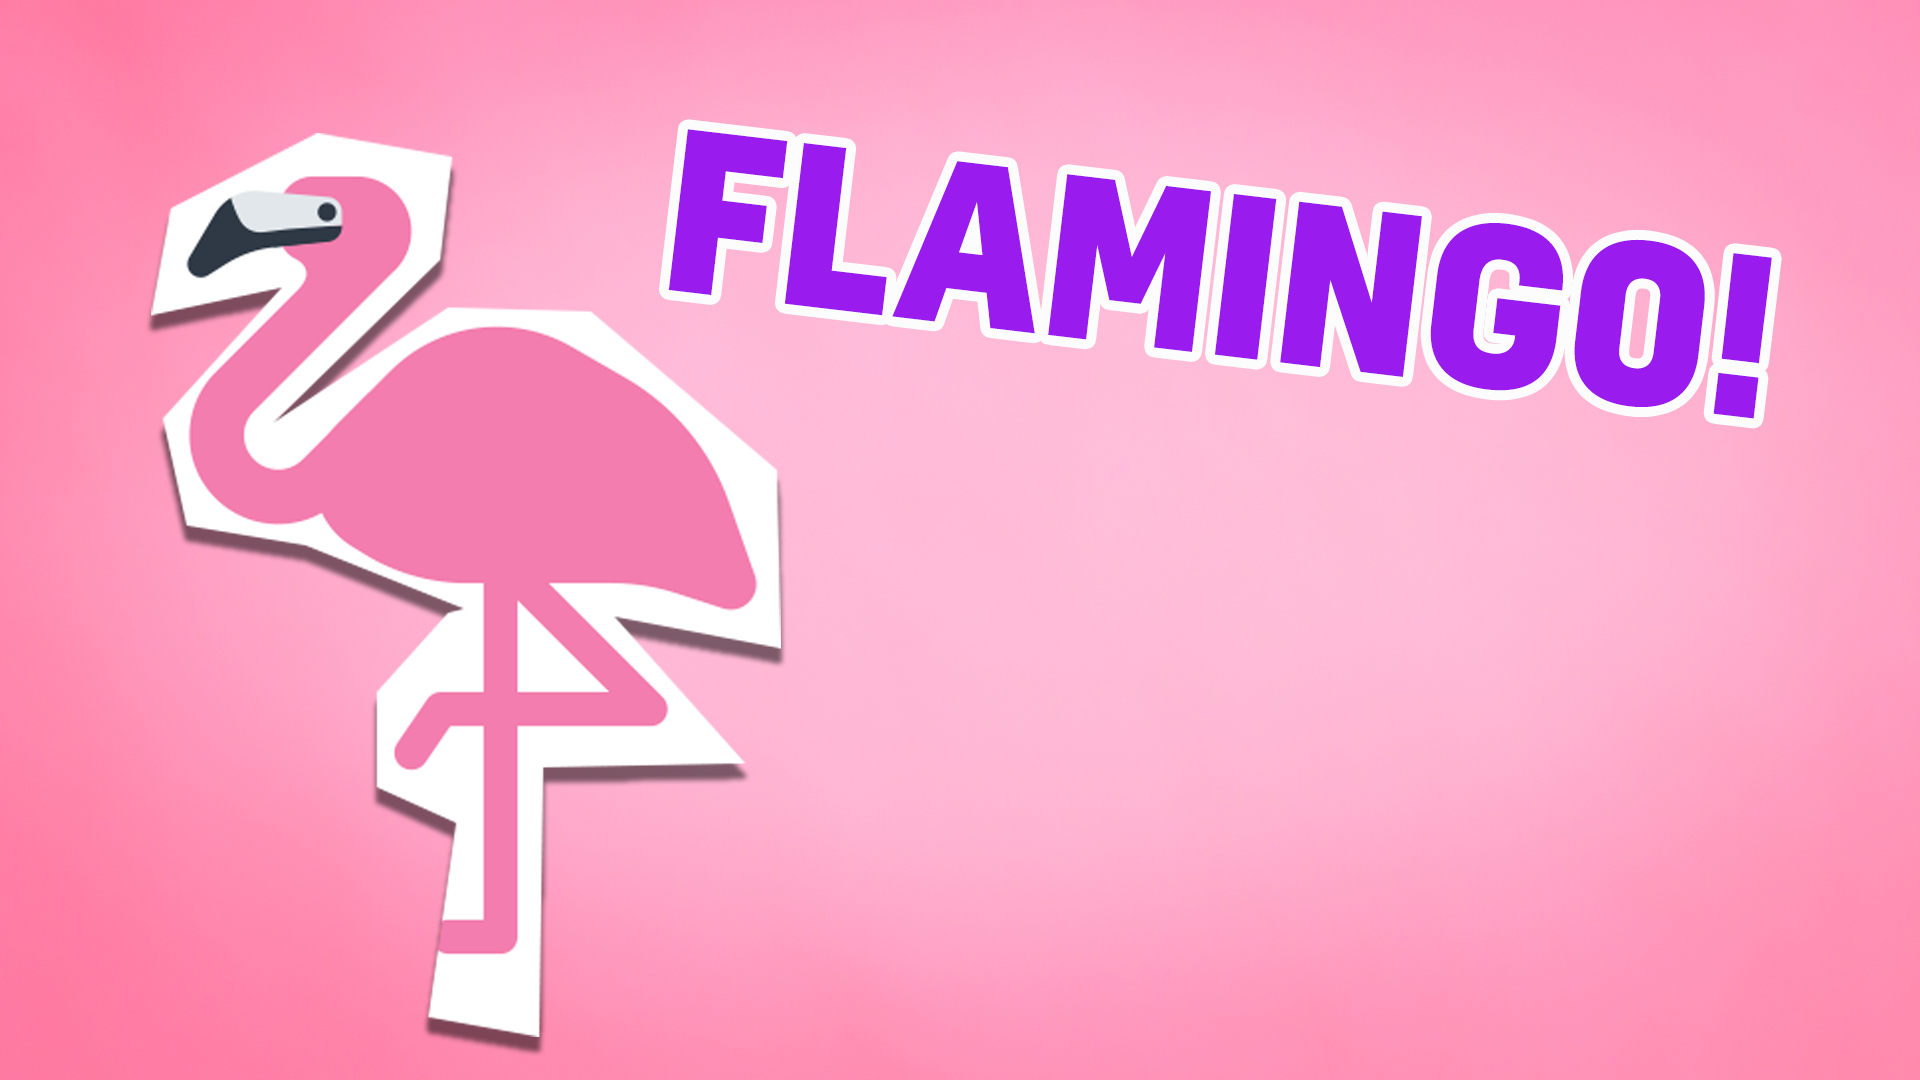 You're a flamingo! You're vibrant, colourful and exciting! You love hanging around with your friends and showing off!